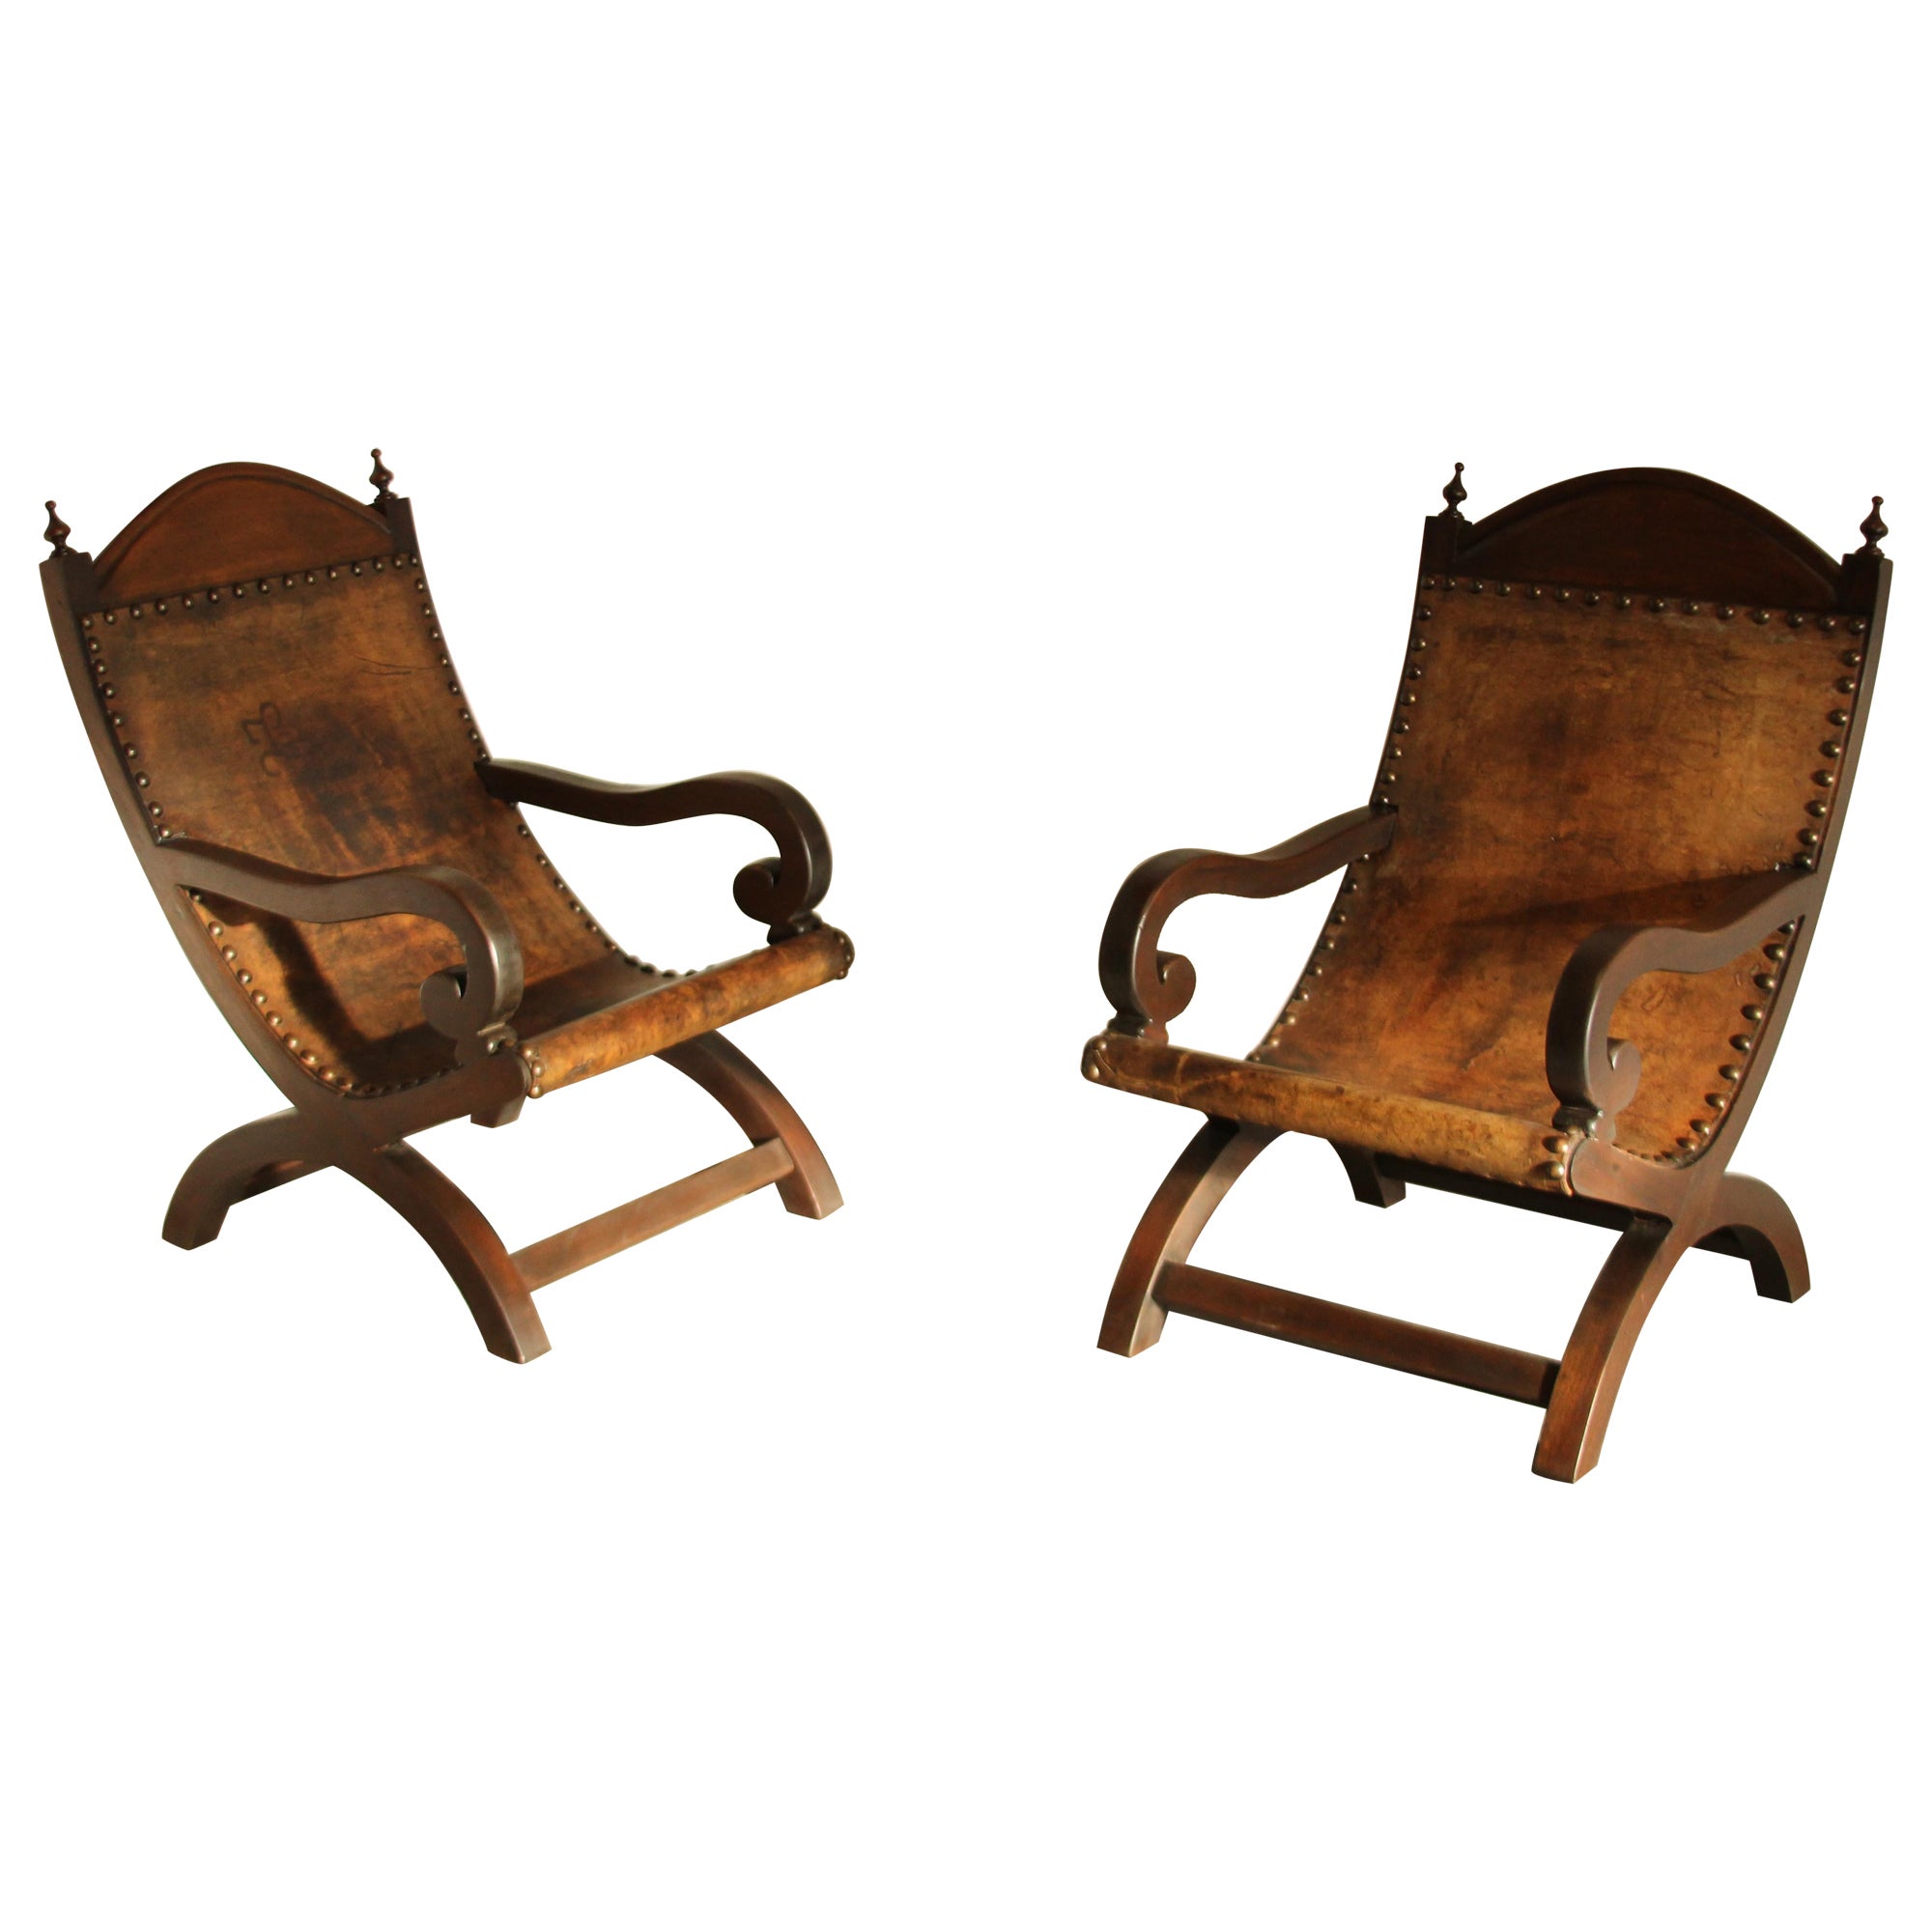 Primitive Mexican Butaque Leather Sling Chairs, 1970s For Sale